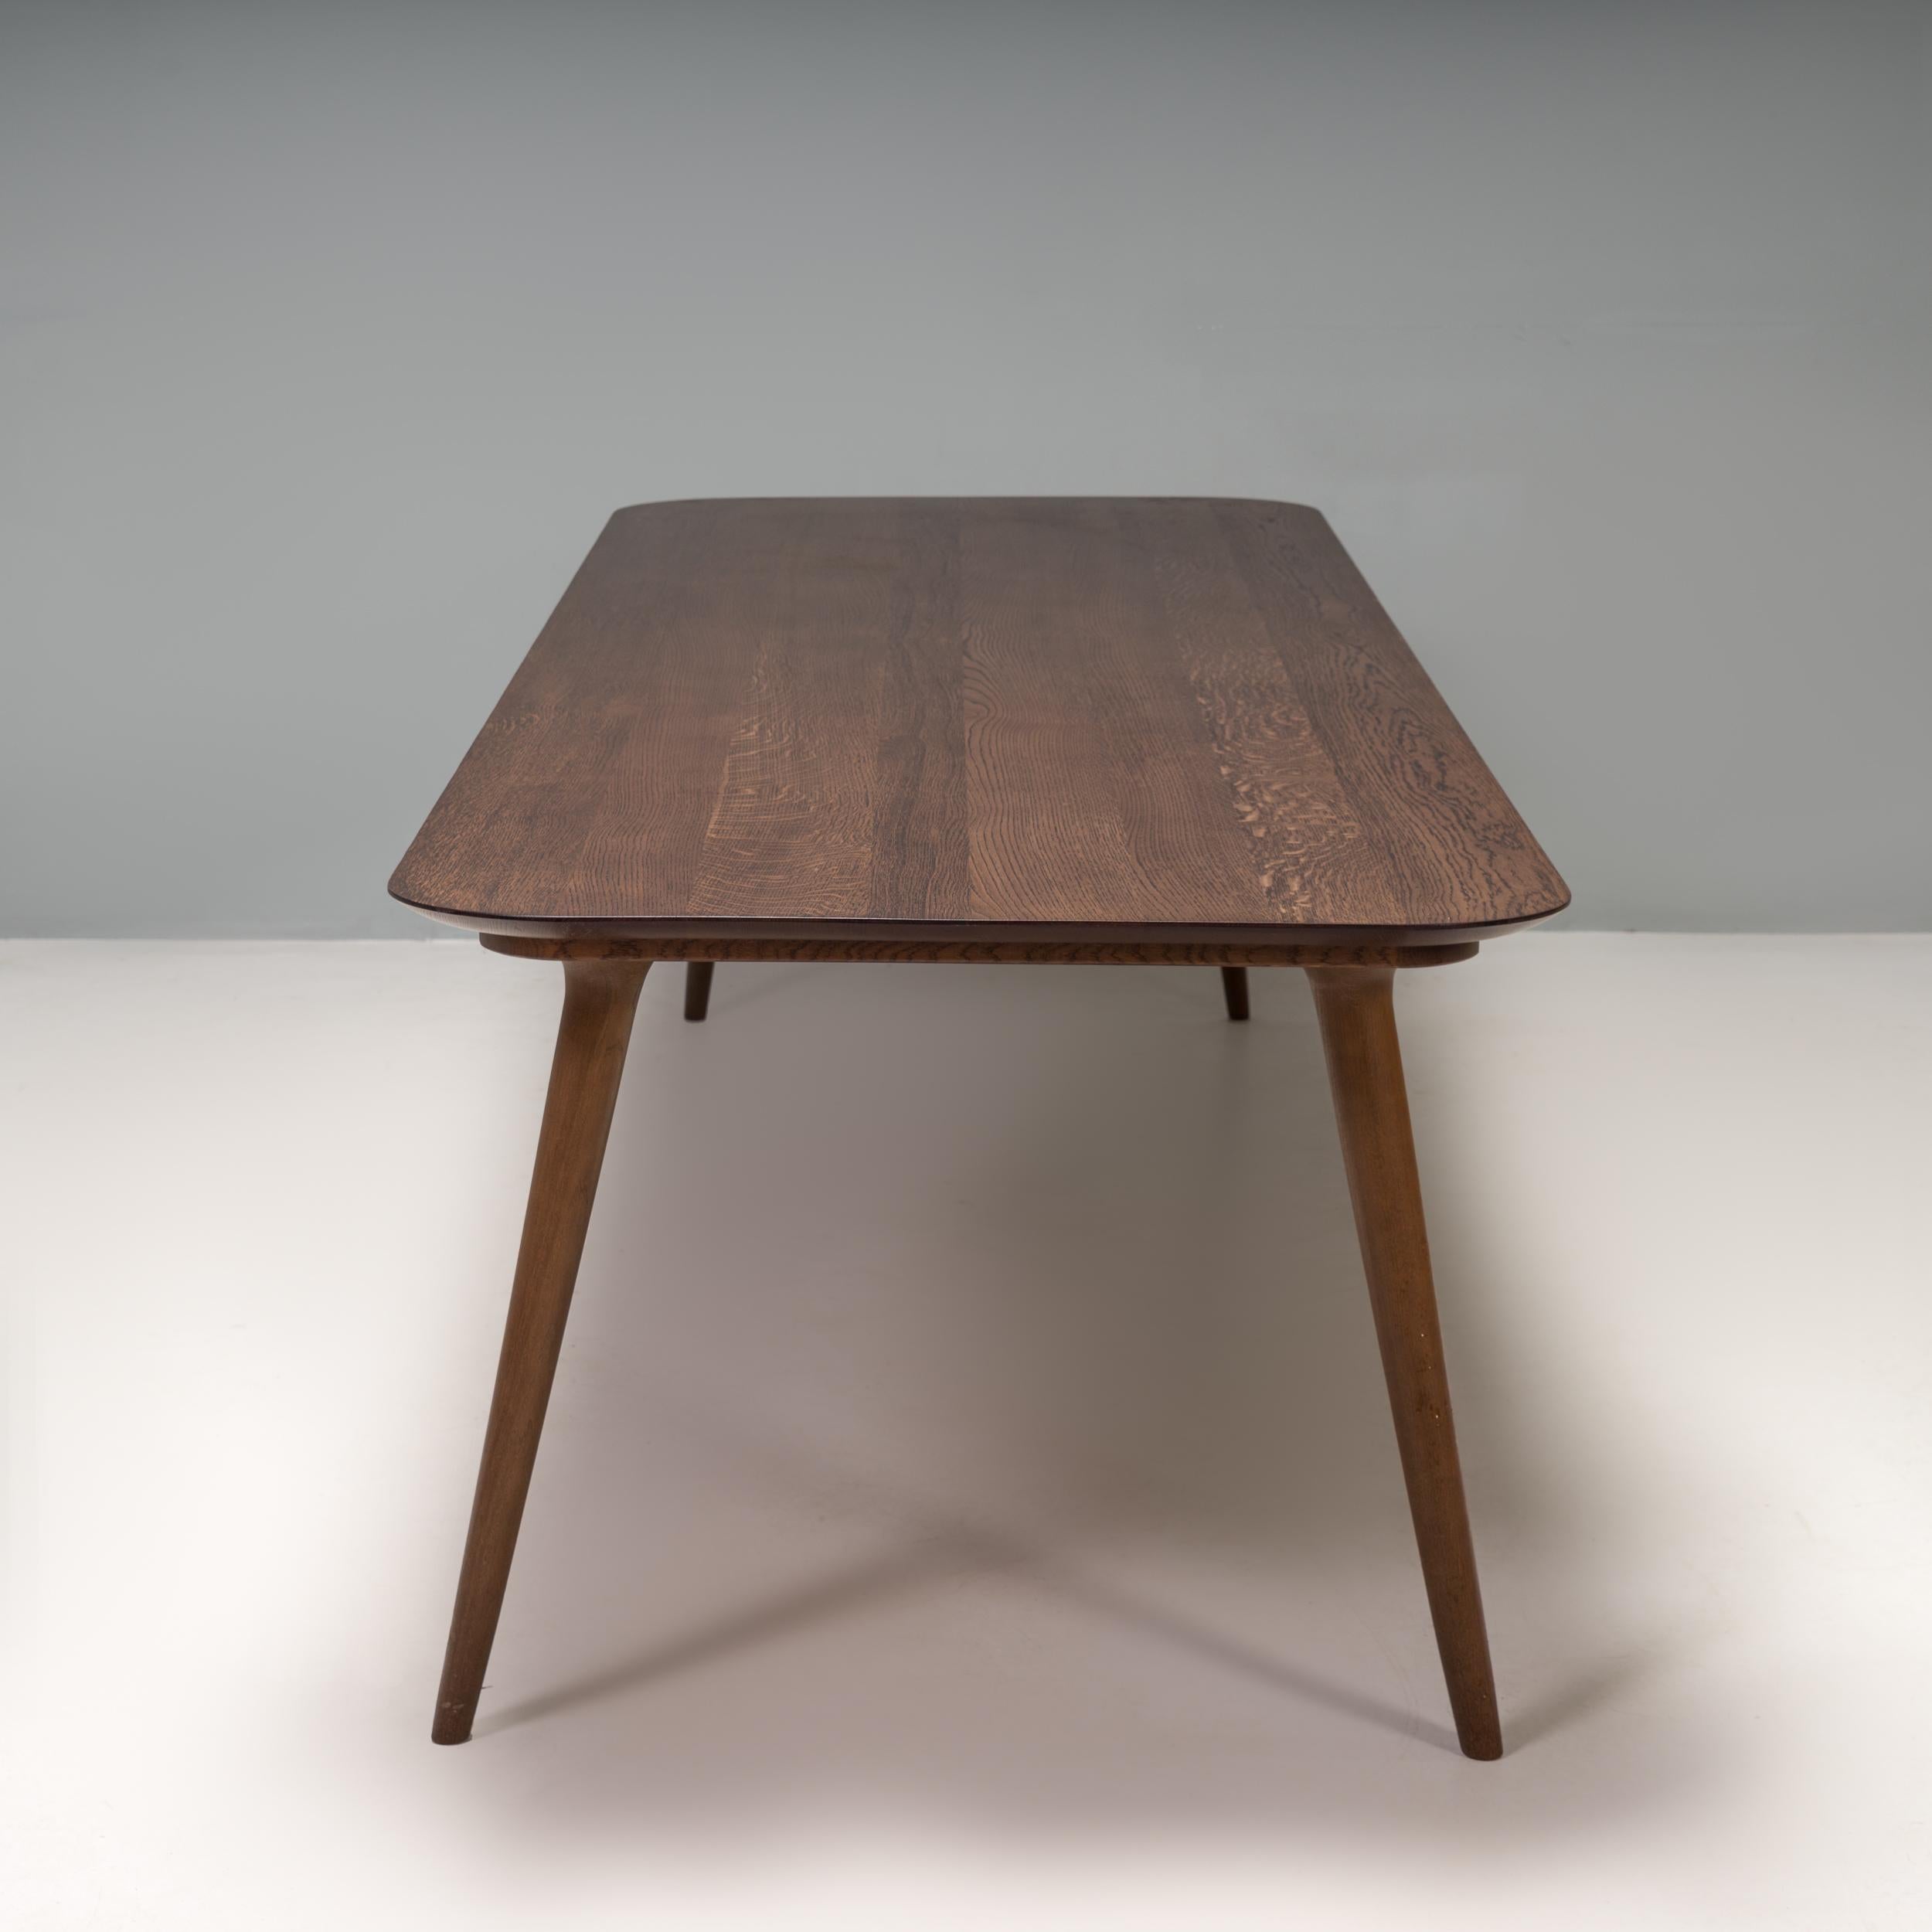 Contemporary Marcel Wanders for Moooi Zio Wenge Oak Dining Table